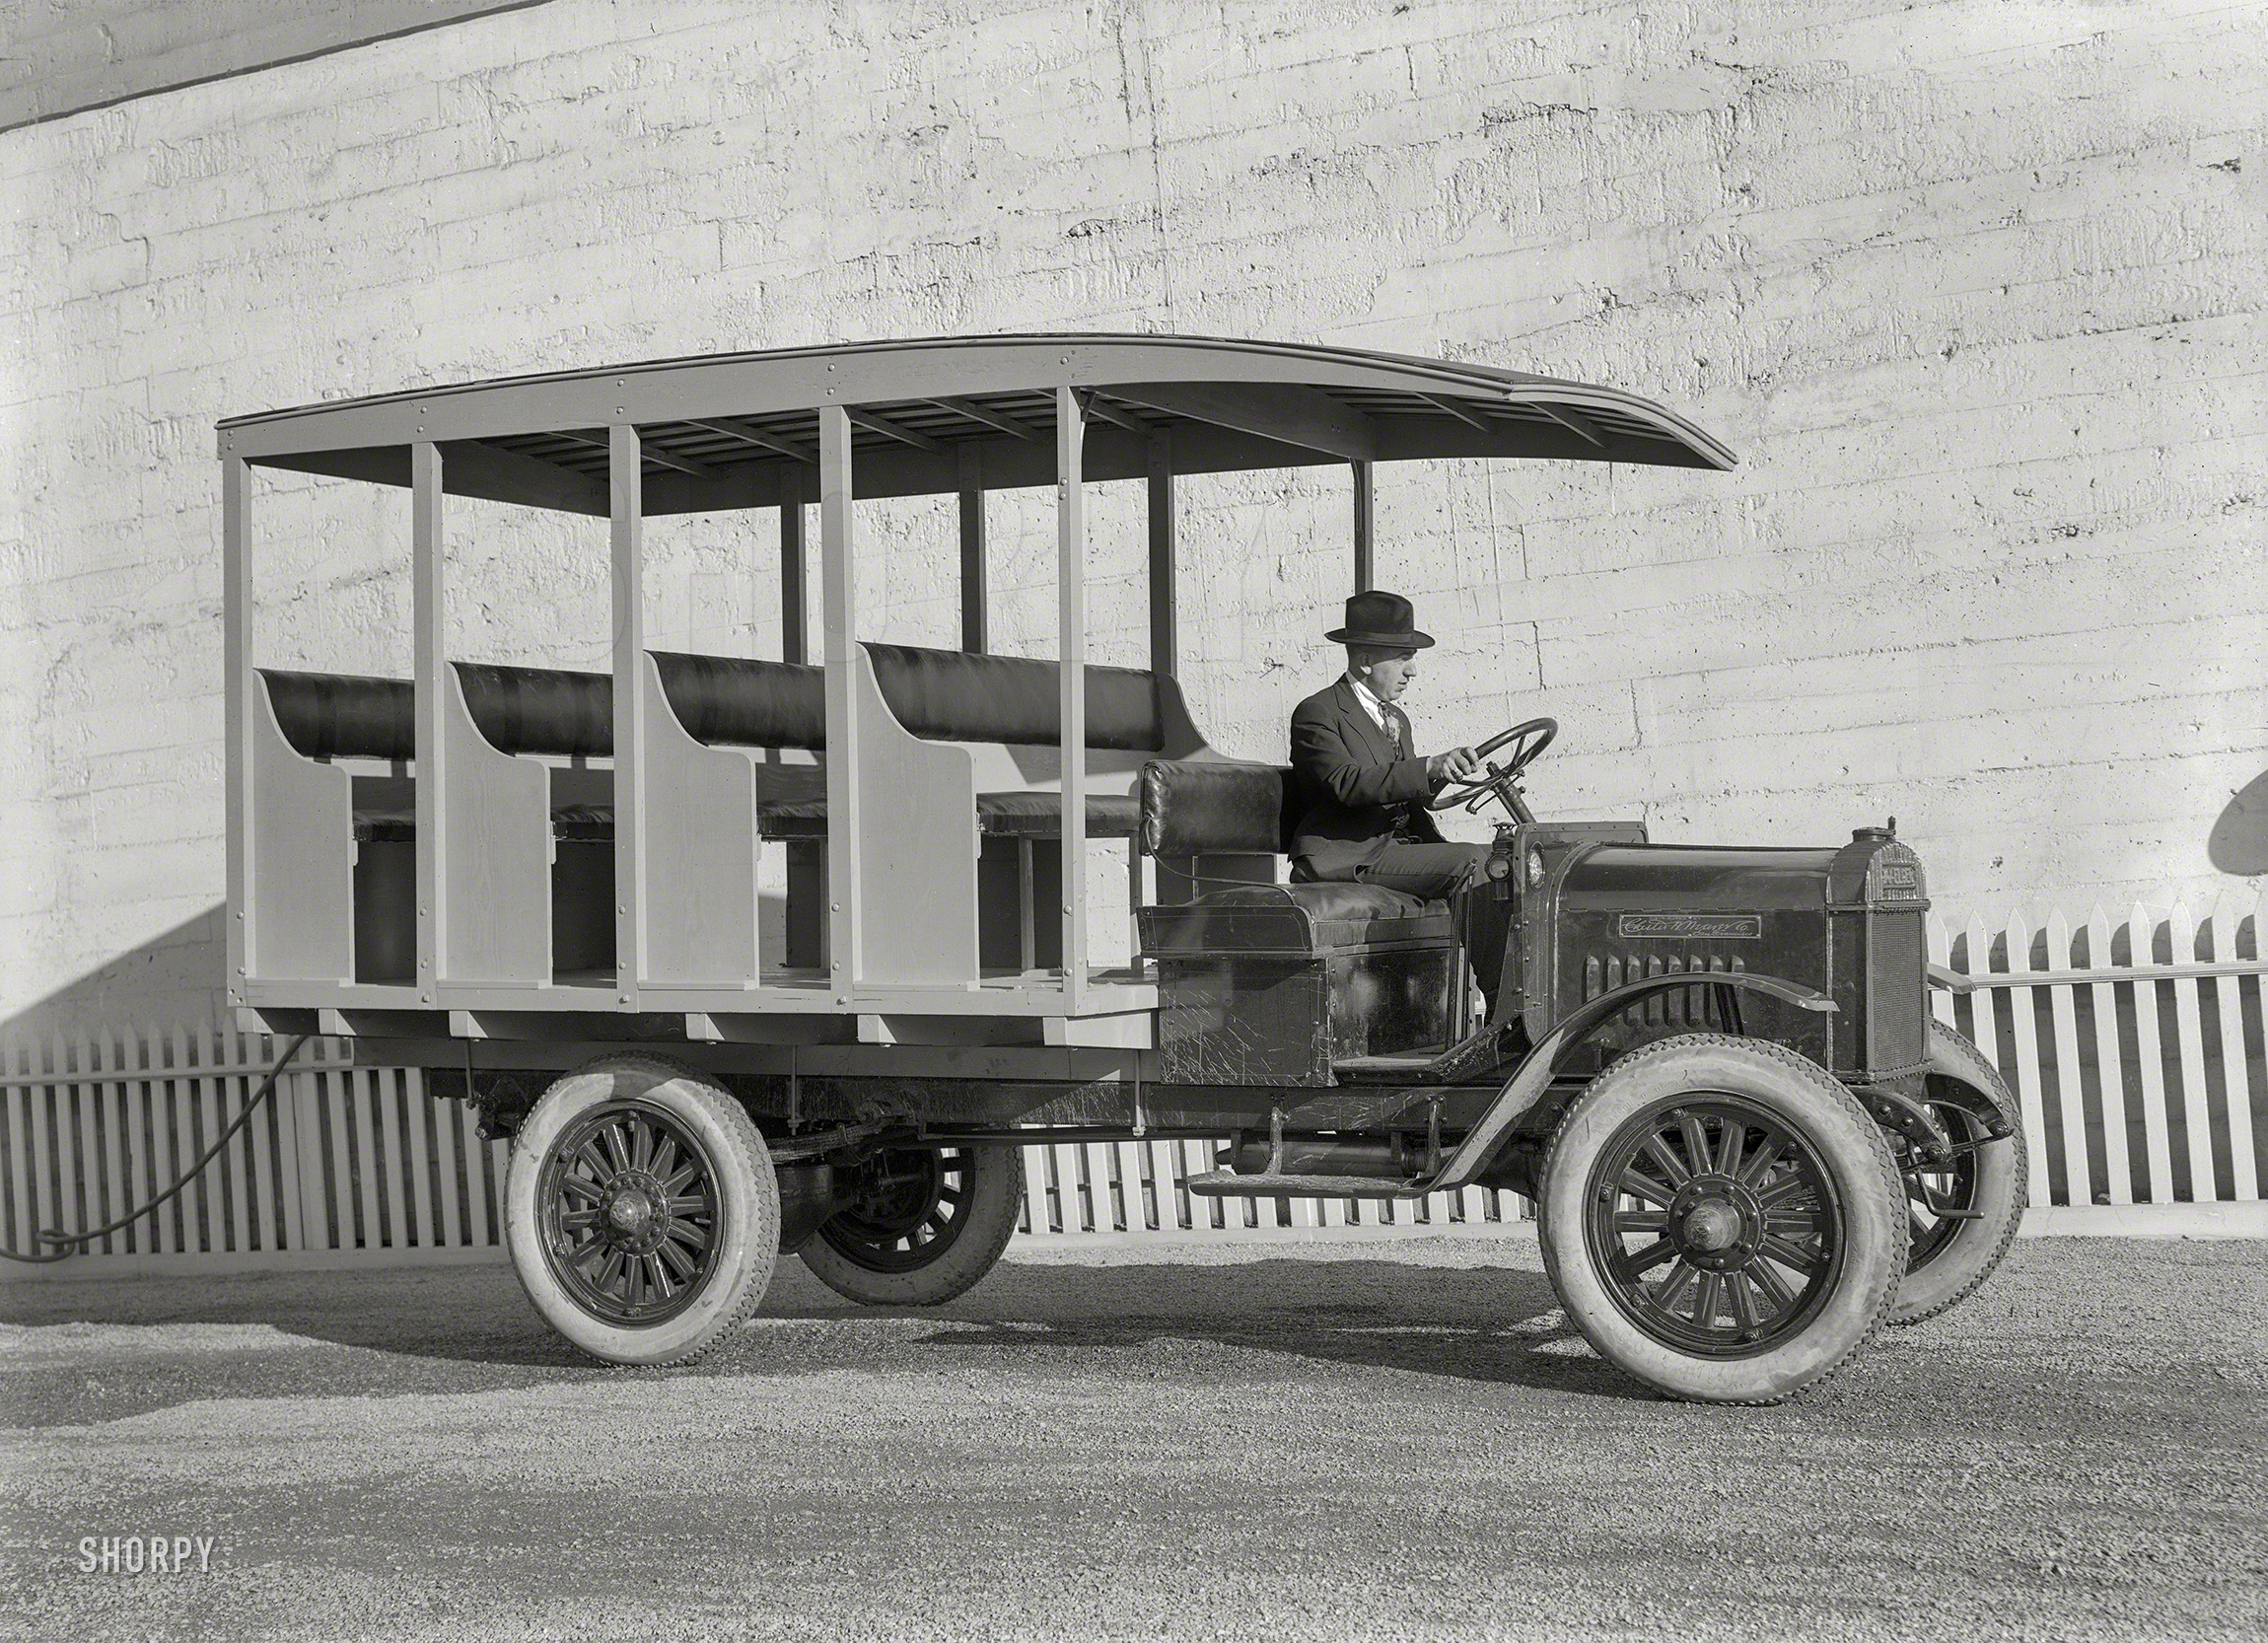 San Francisco circa 1918. "Day-Elder bus." Today's entry in the Shorpy Inventory of Obsolete Omnibi poses the question: How did its passengers get on and off, or from front to back, on a vehicle whose seats seem to extend the full width of the bus? 5x7 glass negative by Christopher Helin. View full size.